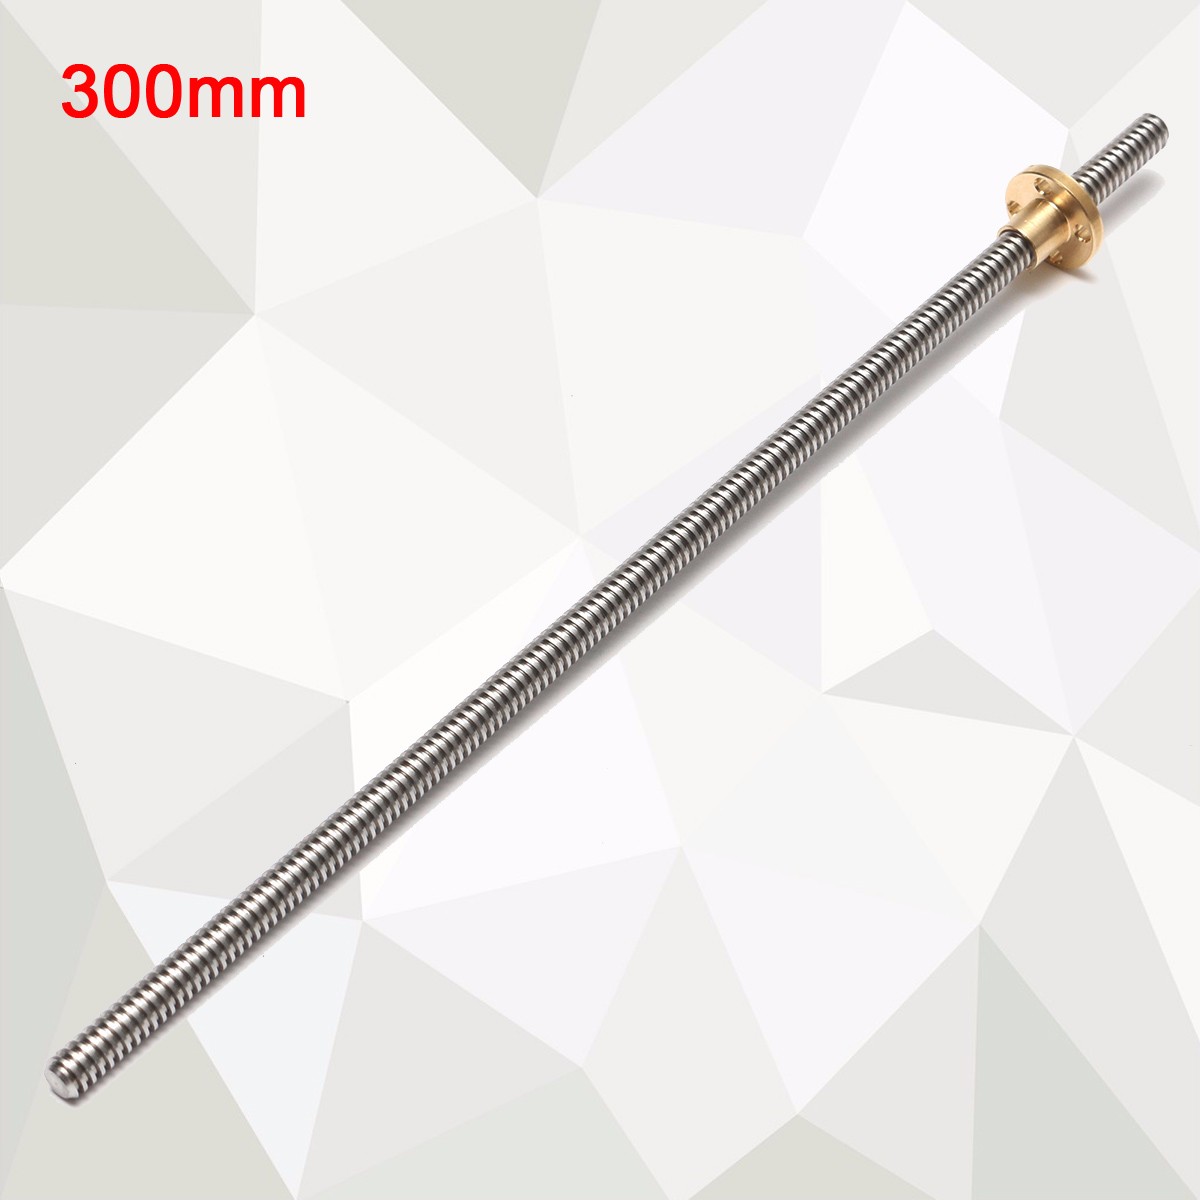 8mm 300/400/500/600mm Lead 2mm Stainless Steel Lead Screw + T8 Nut For CNC 3D Printer Reprap 11